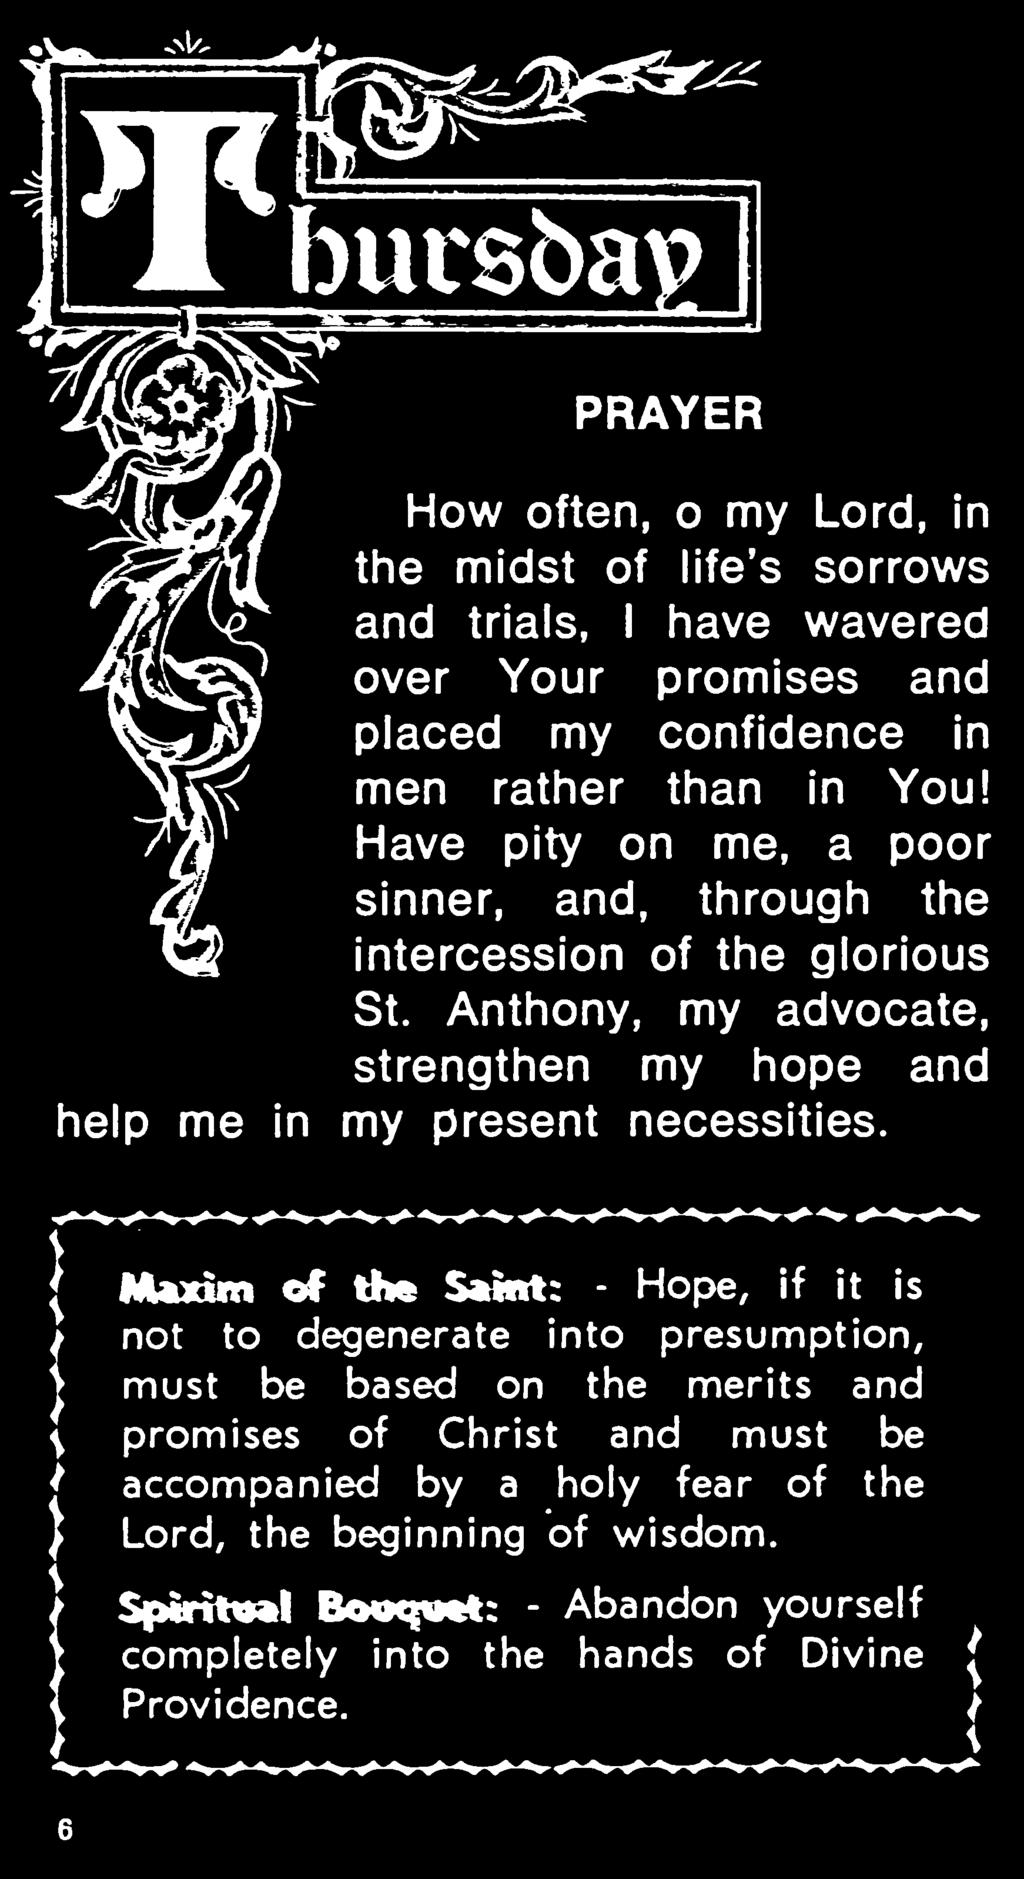 Maxim of the Saint: - Hope, if it is not to degenerate into presumption, must be based on the merits